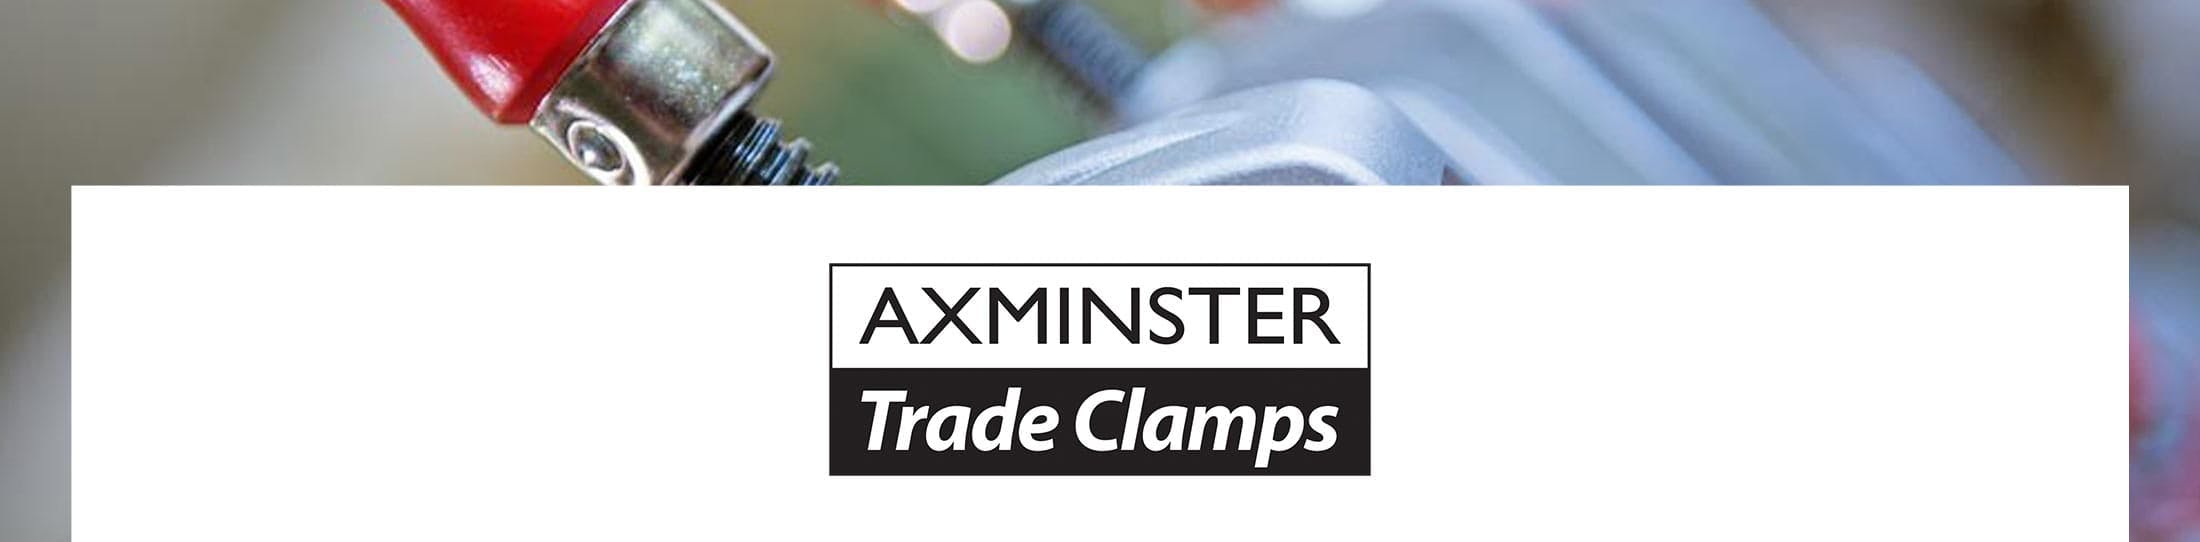 Axminster Trade Clamps